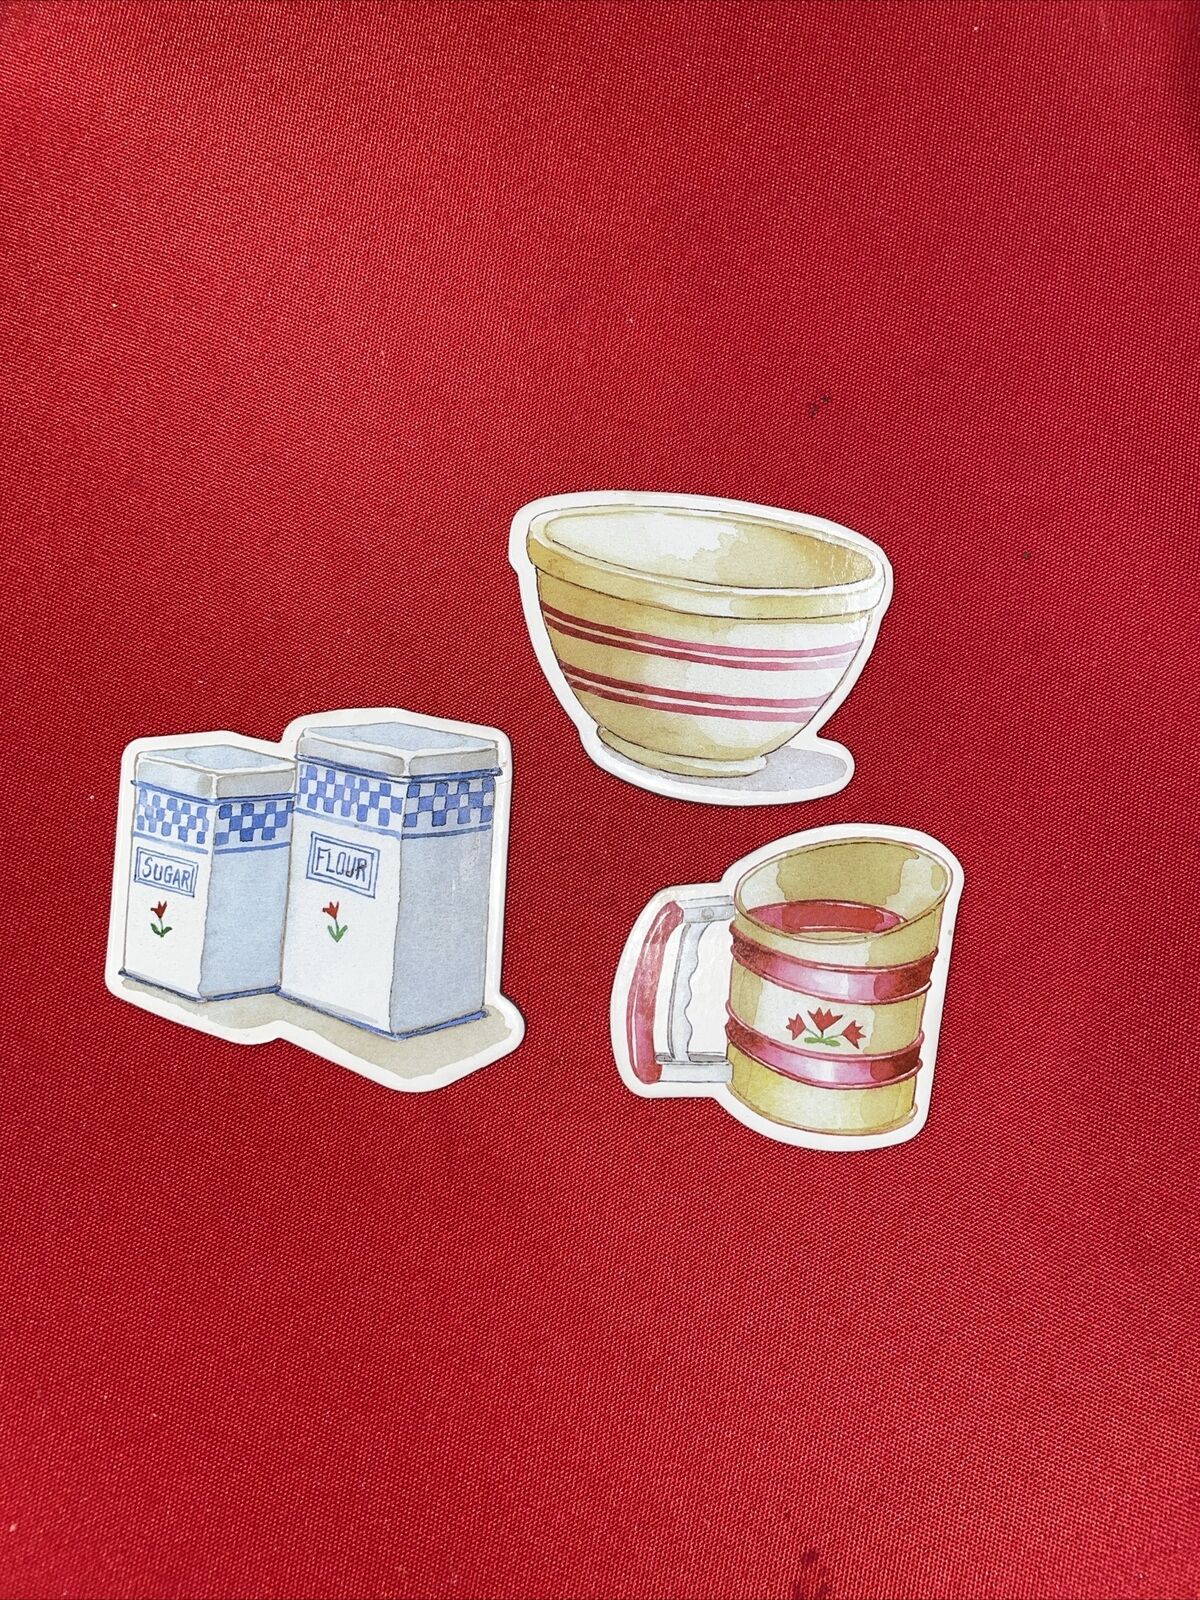 3 Small Refrigerator Magnets 03 For Only Five Dollars